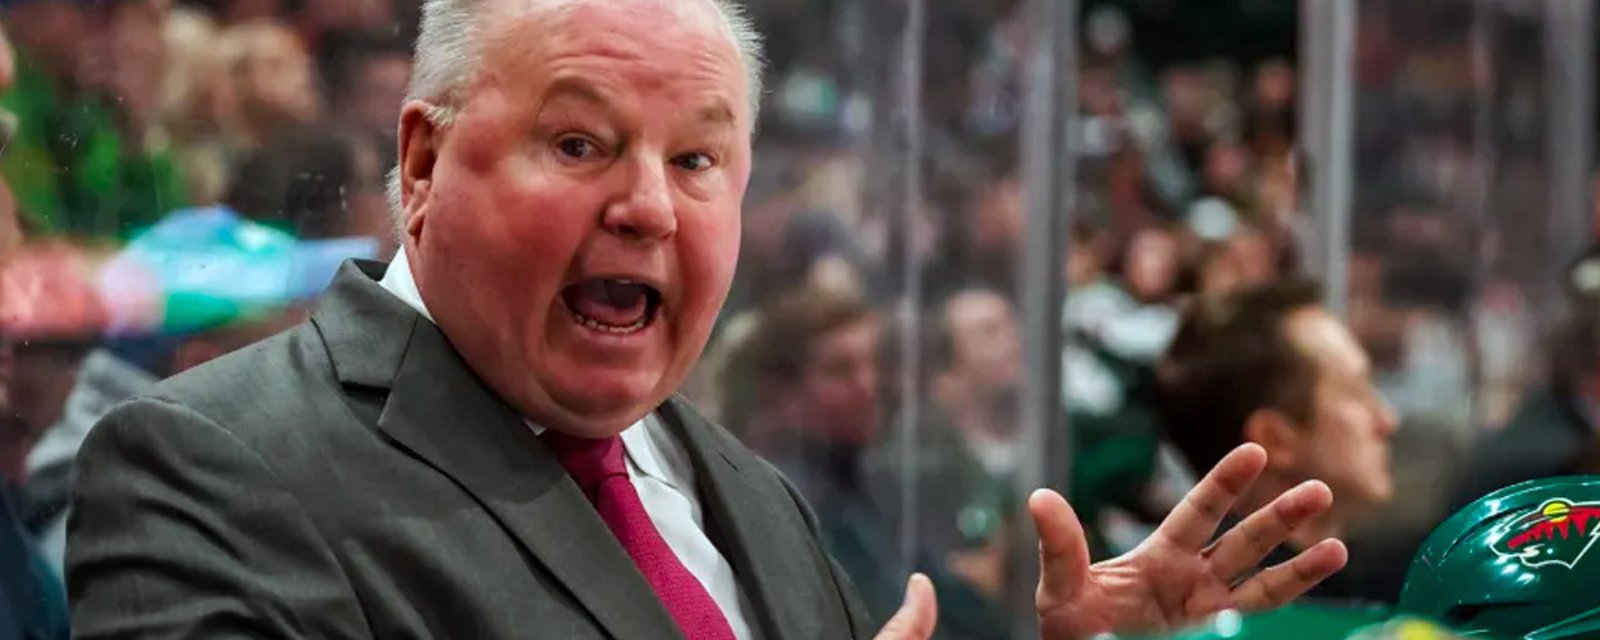 Breaking: Wild make official statement on the future of head coach Bruce Boudreau